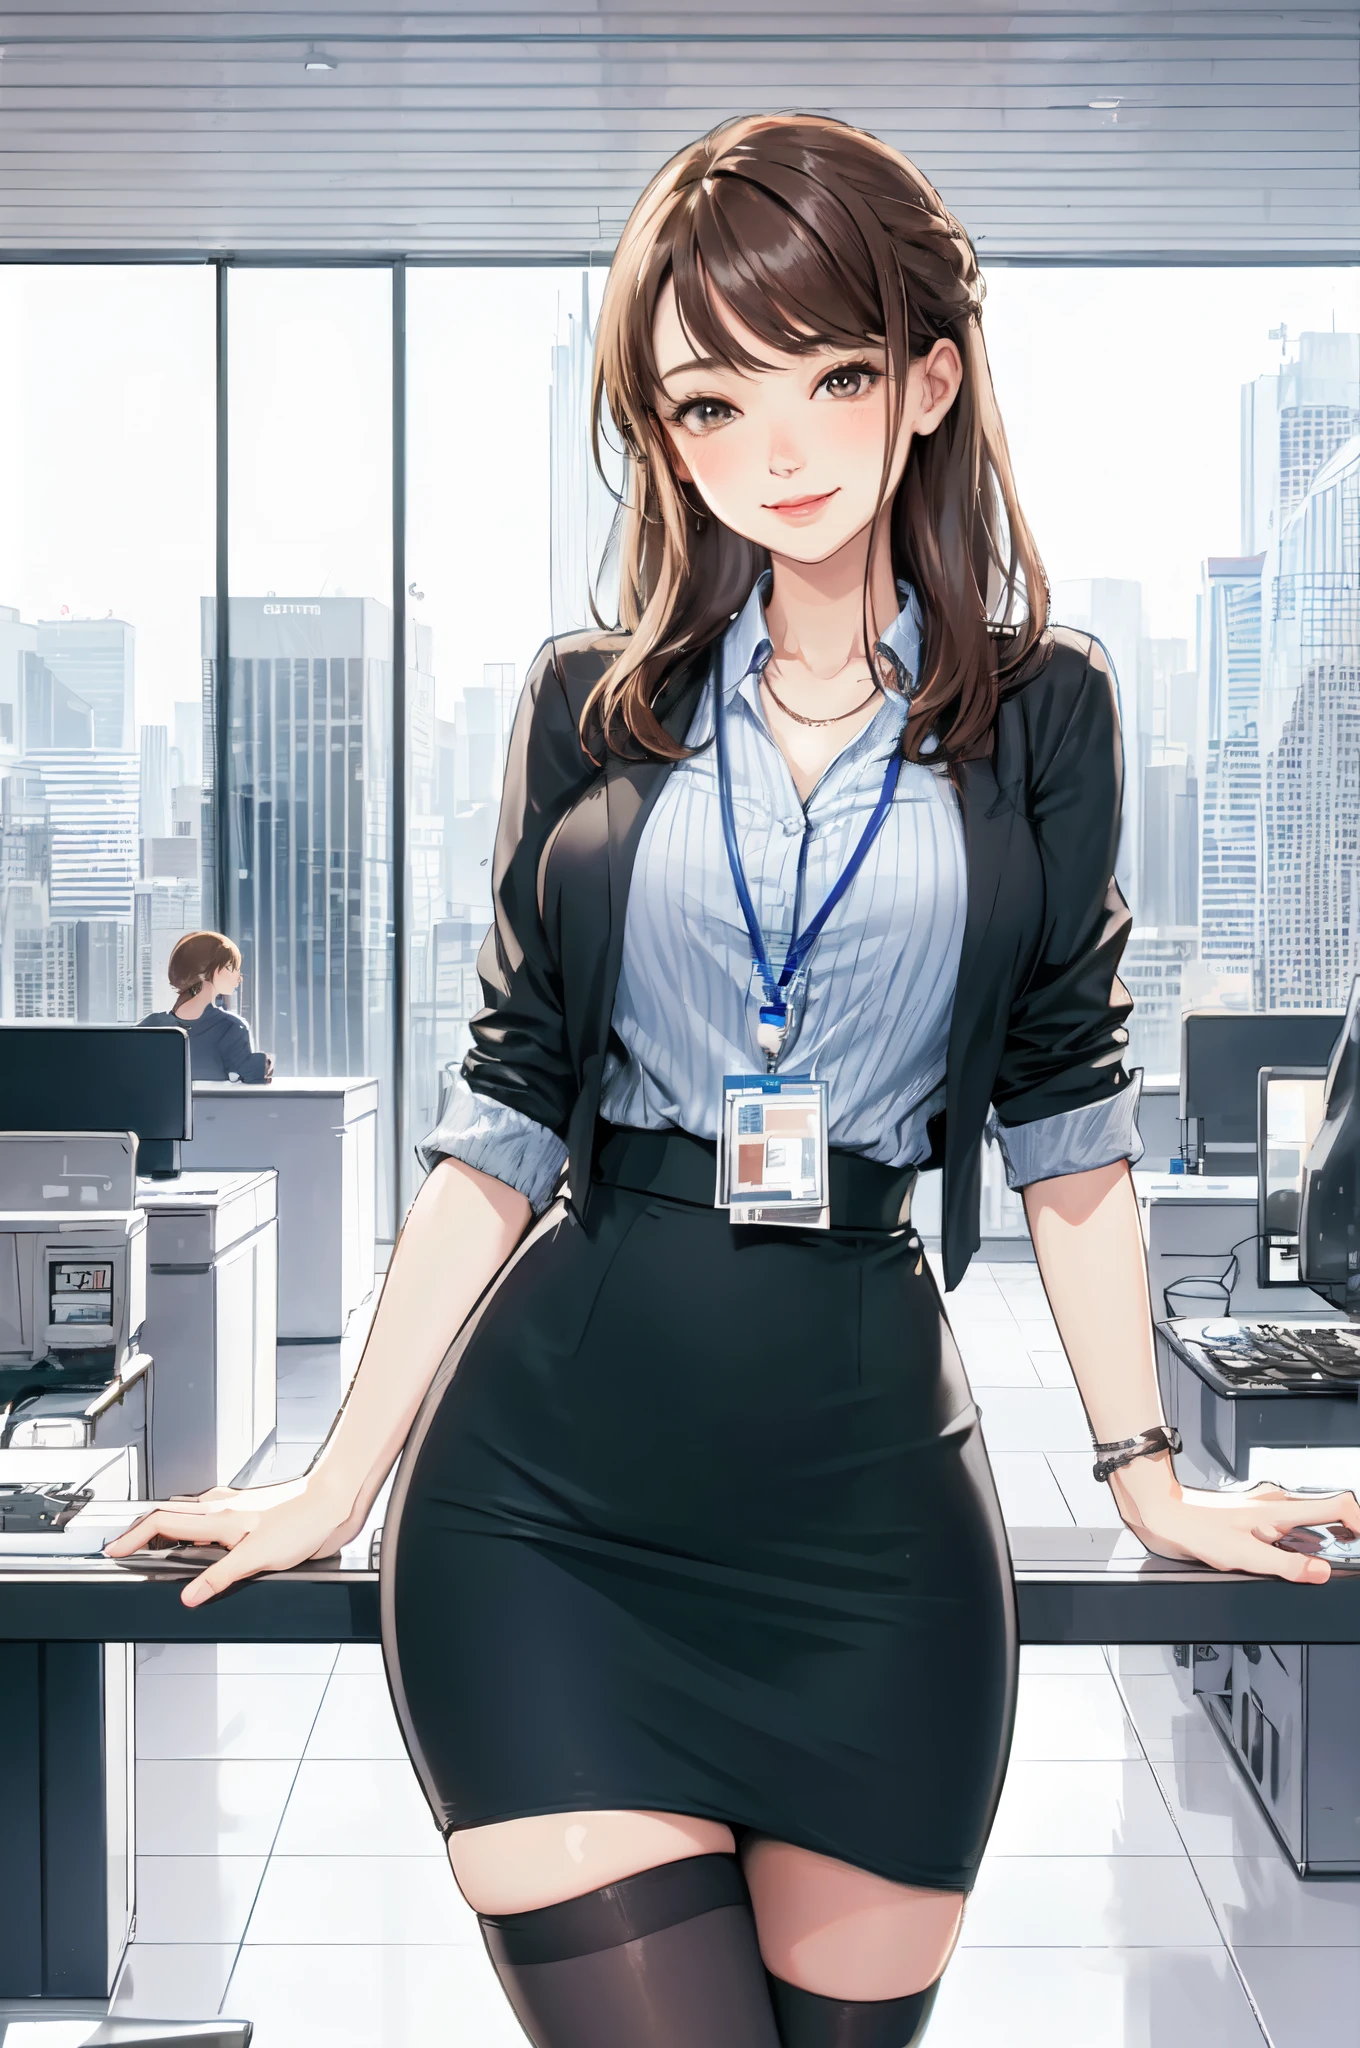 1lady standing, /(casual shirt/) (pencil skirt:1.1) /(id card lanyard/), mature female, /(brown hair/) bangs, blush kind smile, (masterpiece best quality:1.2) delicate illustration ultra-detailed, large breast BREAK /(modern office indoors/), window skyscraper